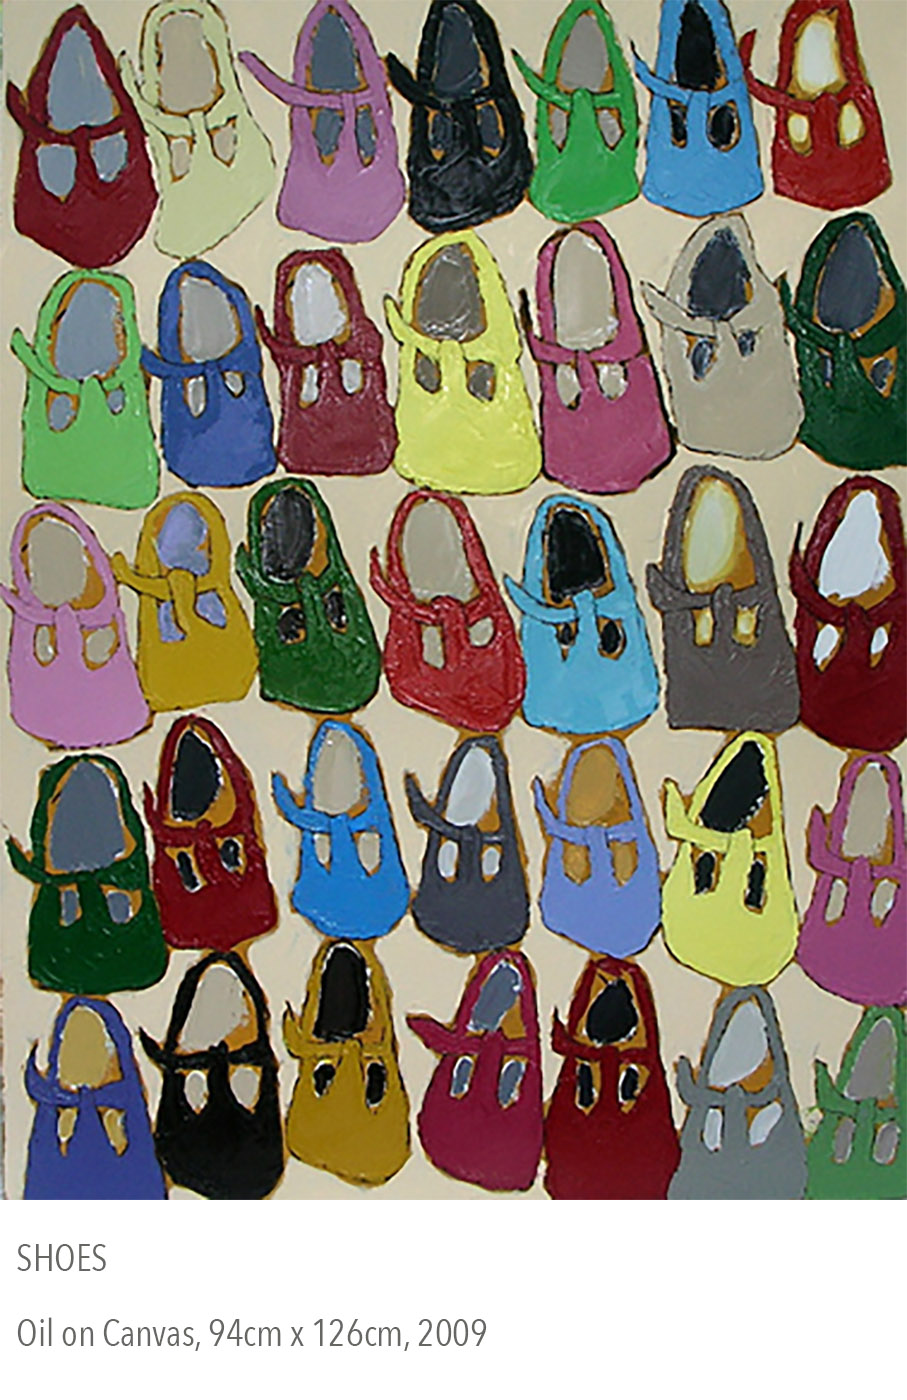 2009 oil painting called Shoes